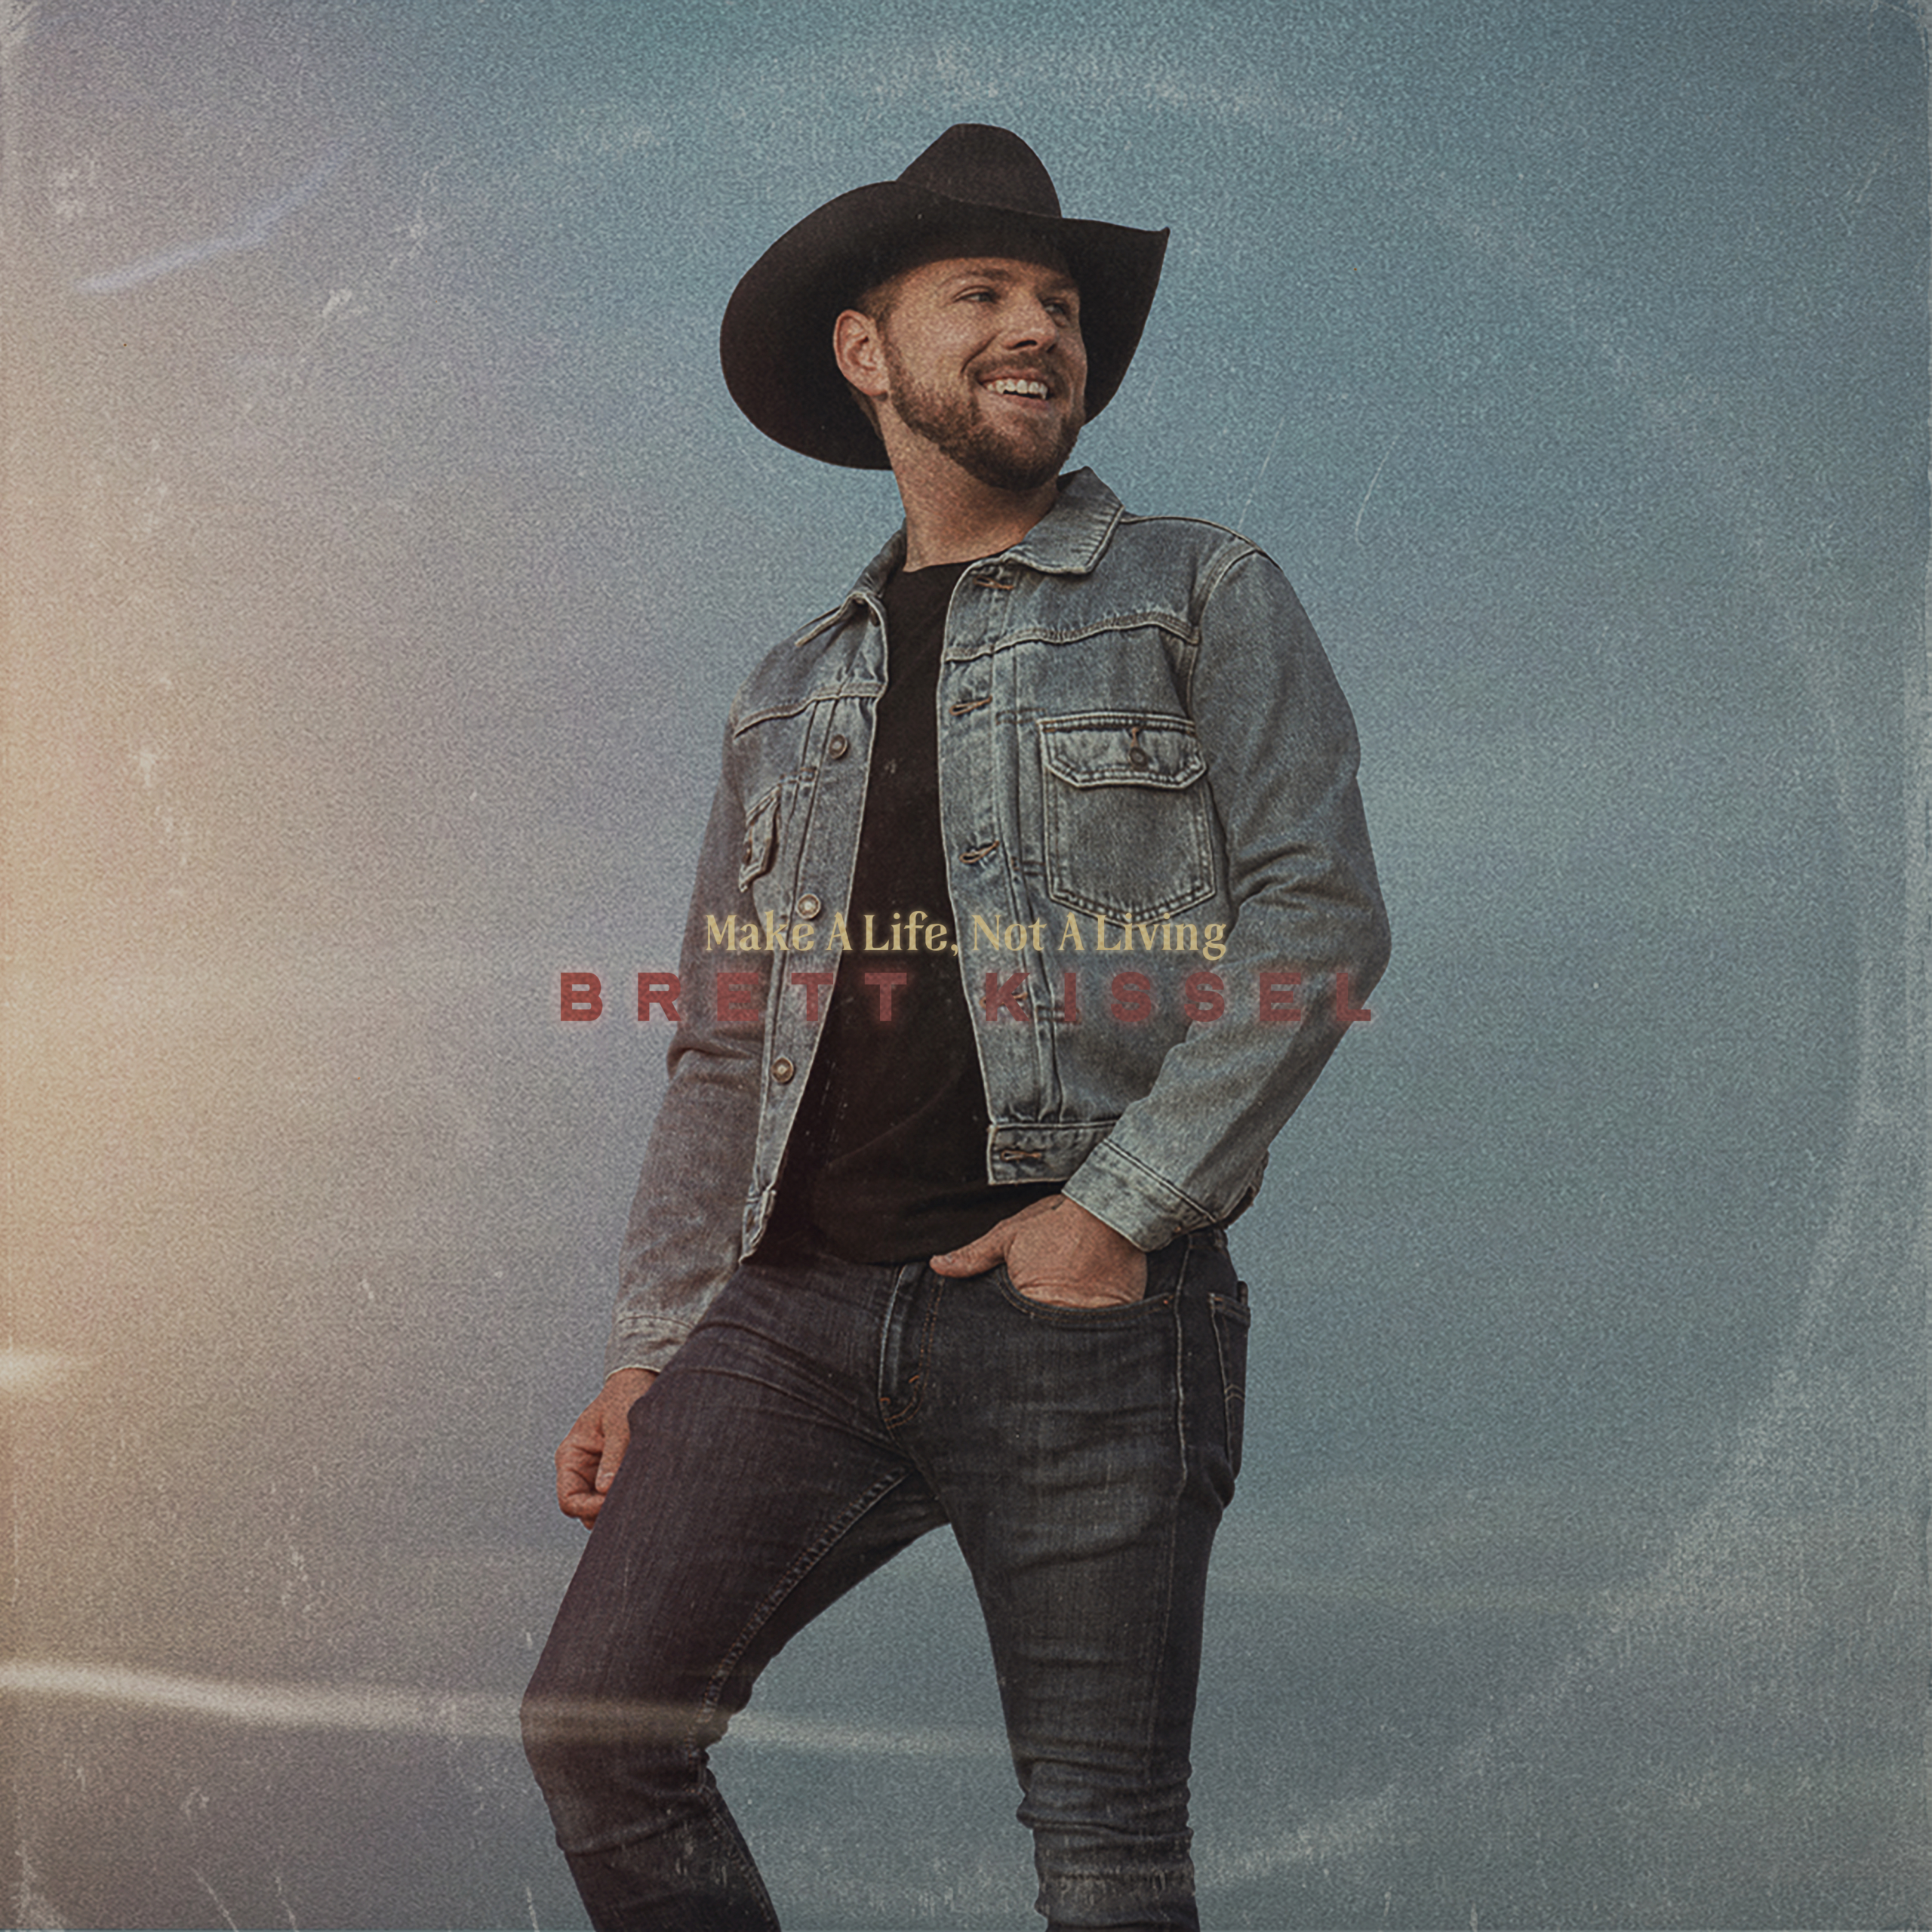 Brett Kissel’s “Make A Life, Not A Living” is available everywhere now, March 5th